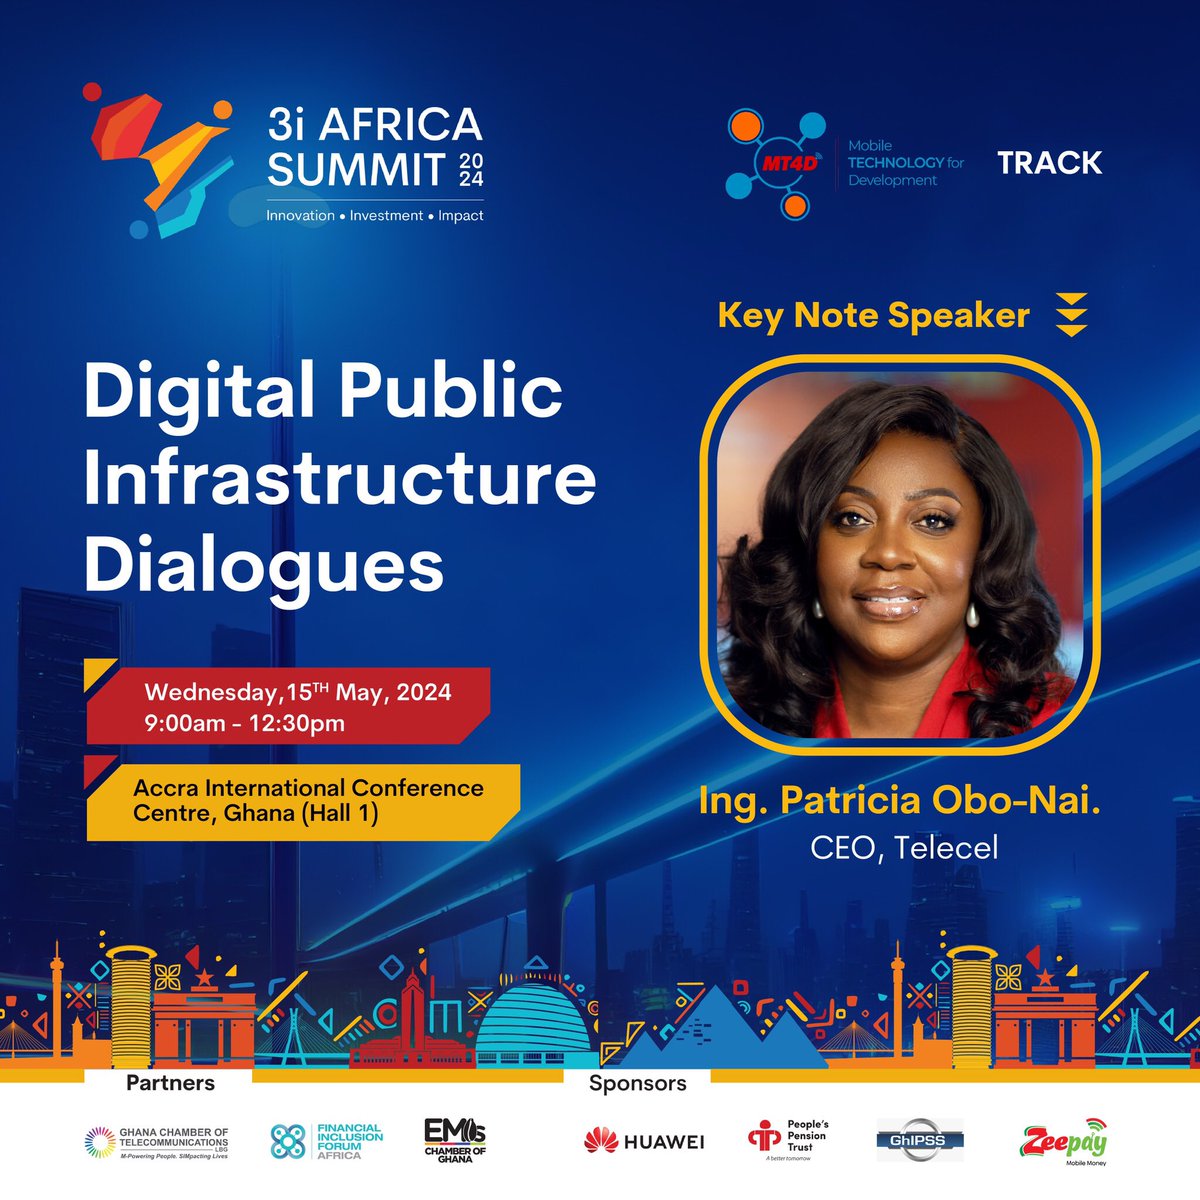 Connect with our CEO, @PatriciaOboNai , at the @3iafricasummit this Wednesday, 15th May 2024 as she delivers a keynote address on the pivotal role of digital infrastructure and innovation in accelerating Africa's development. #ConnectingEnergies #3iAfricaSummit